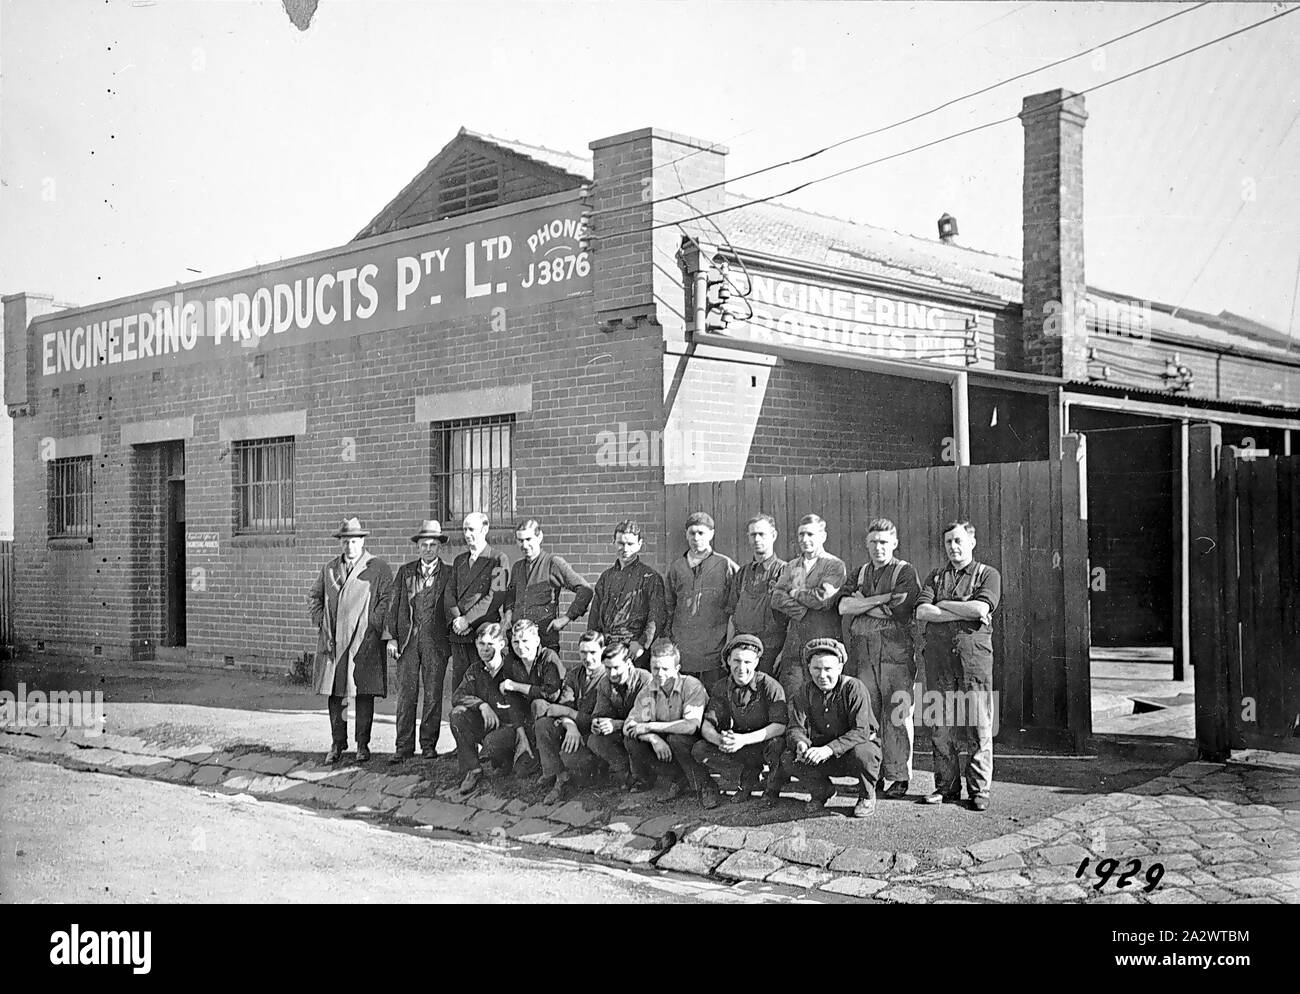 Negative - Workers Outside Factory, Engineering Products Pty Ltd, Richmond, Victoria, 1929, Workers outside the factory of Engineering Products Proprietary Limited Stock Photo